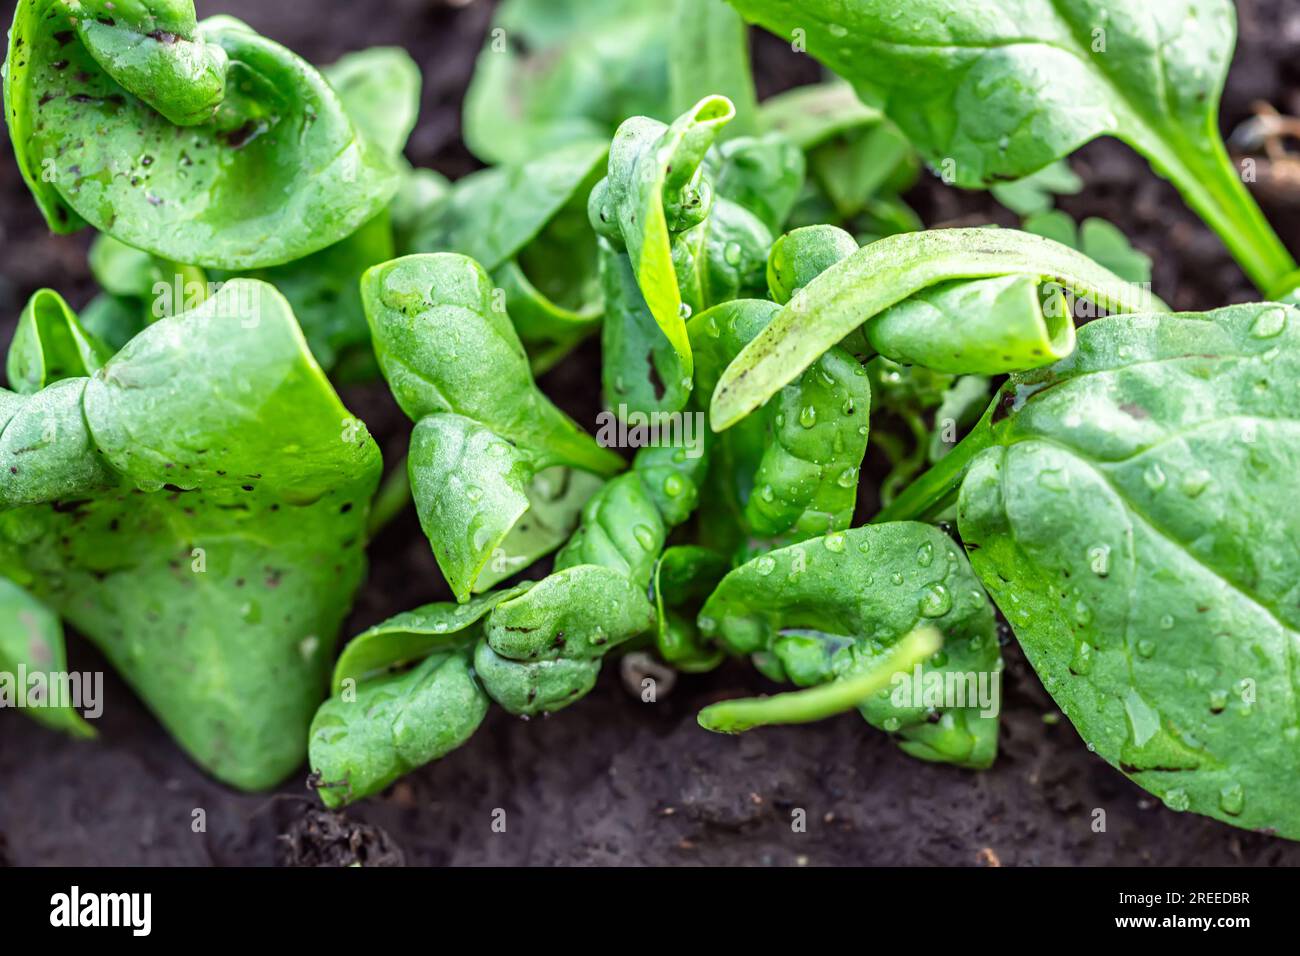 damaged spinach leaves in an organic garden bed. The infected plants are evident, and they are being treated with insecticides to combat the issue. Stock Photo